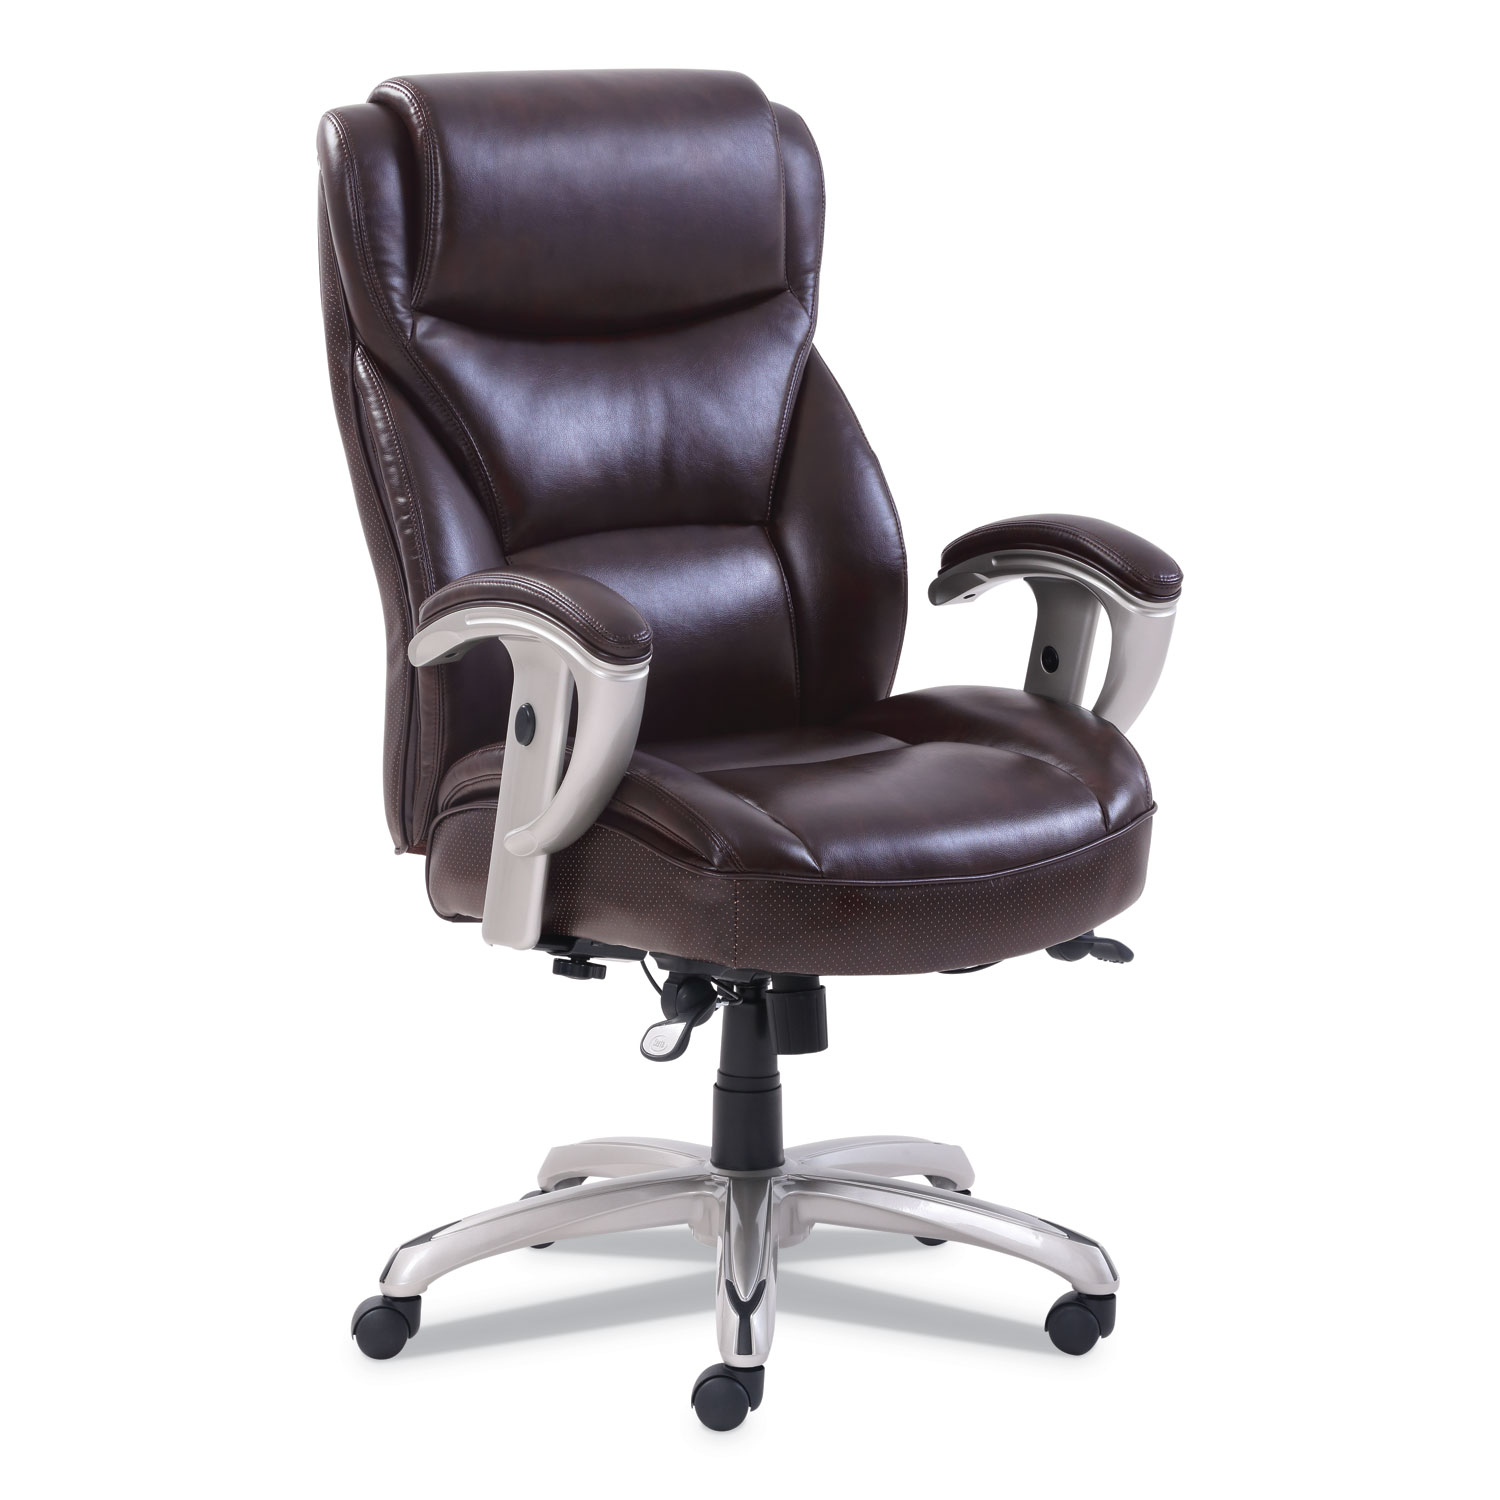  SertaPedic 49416BRW Emerson Big and Tall Task Chair, Supports up to 400 lbs., Brown Seat/Brown Back, Silver Base (SRJ49416BRW) 